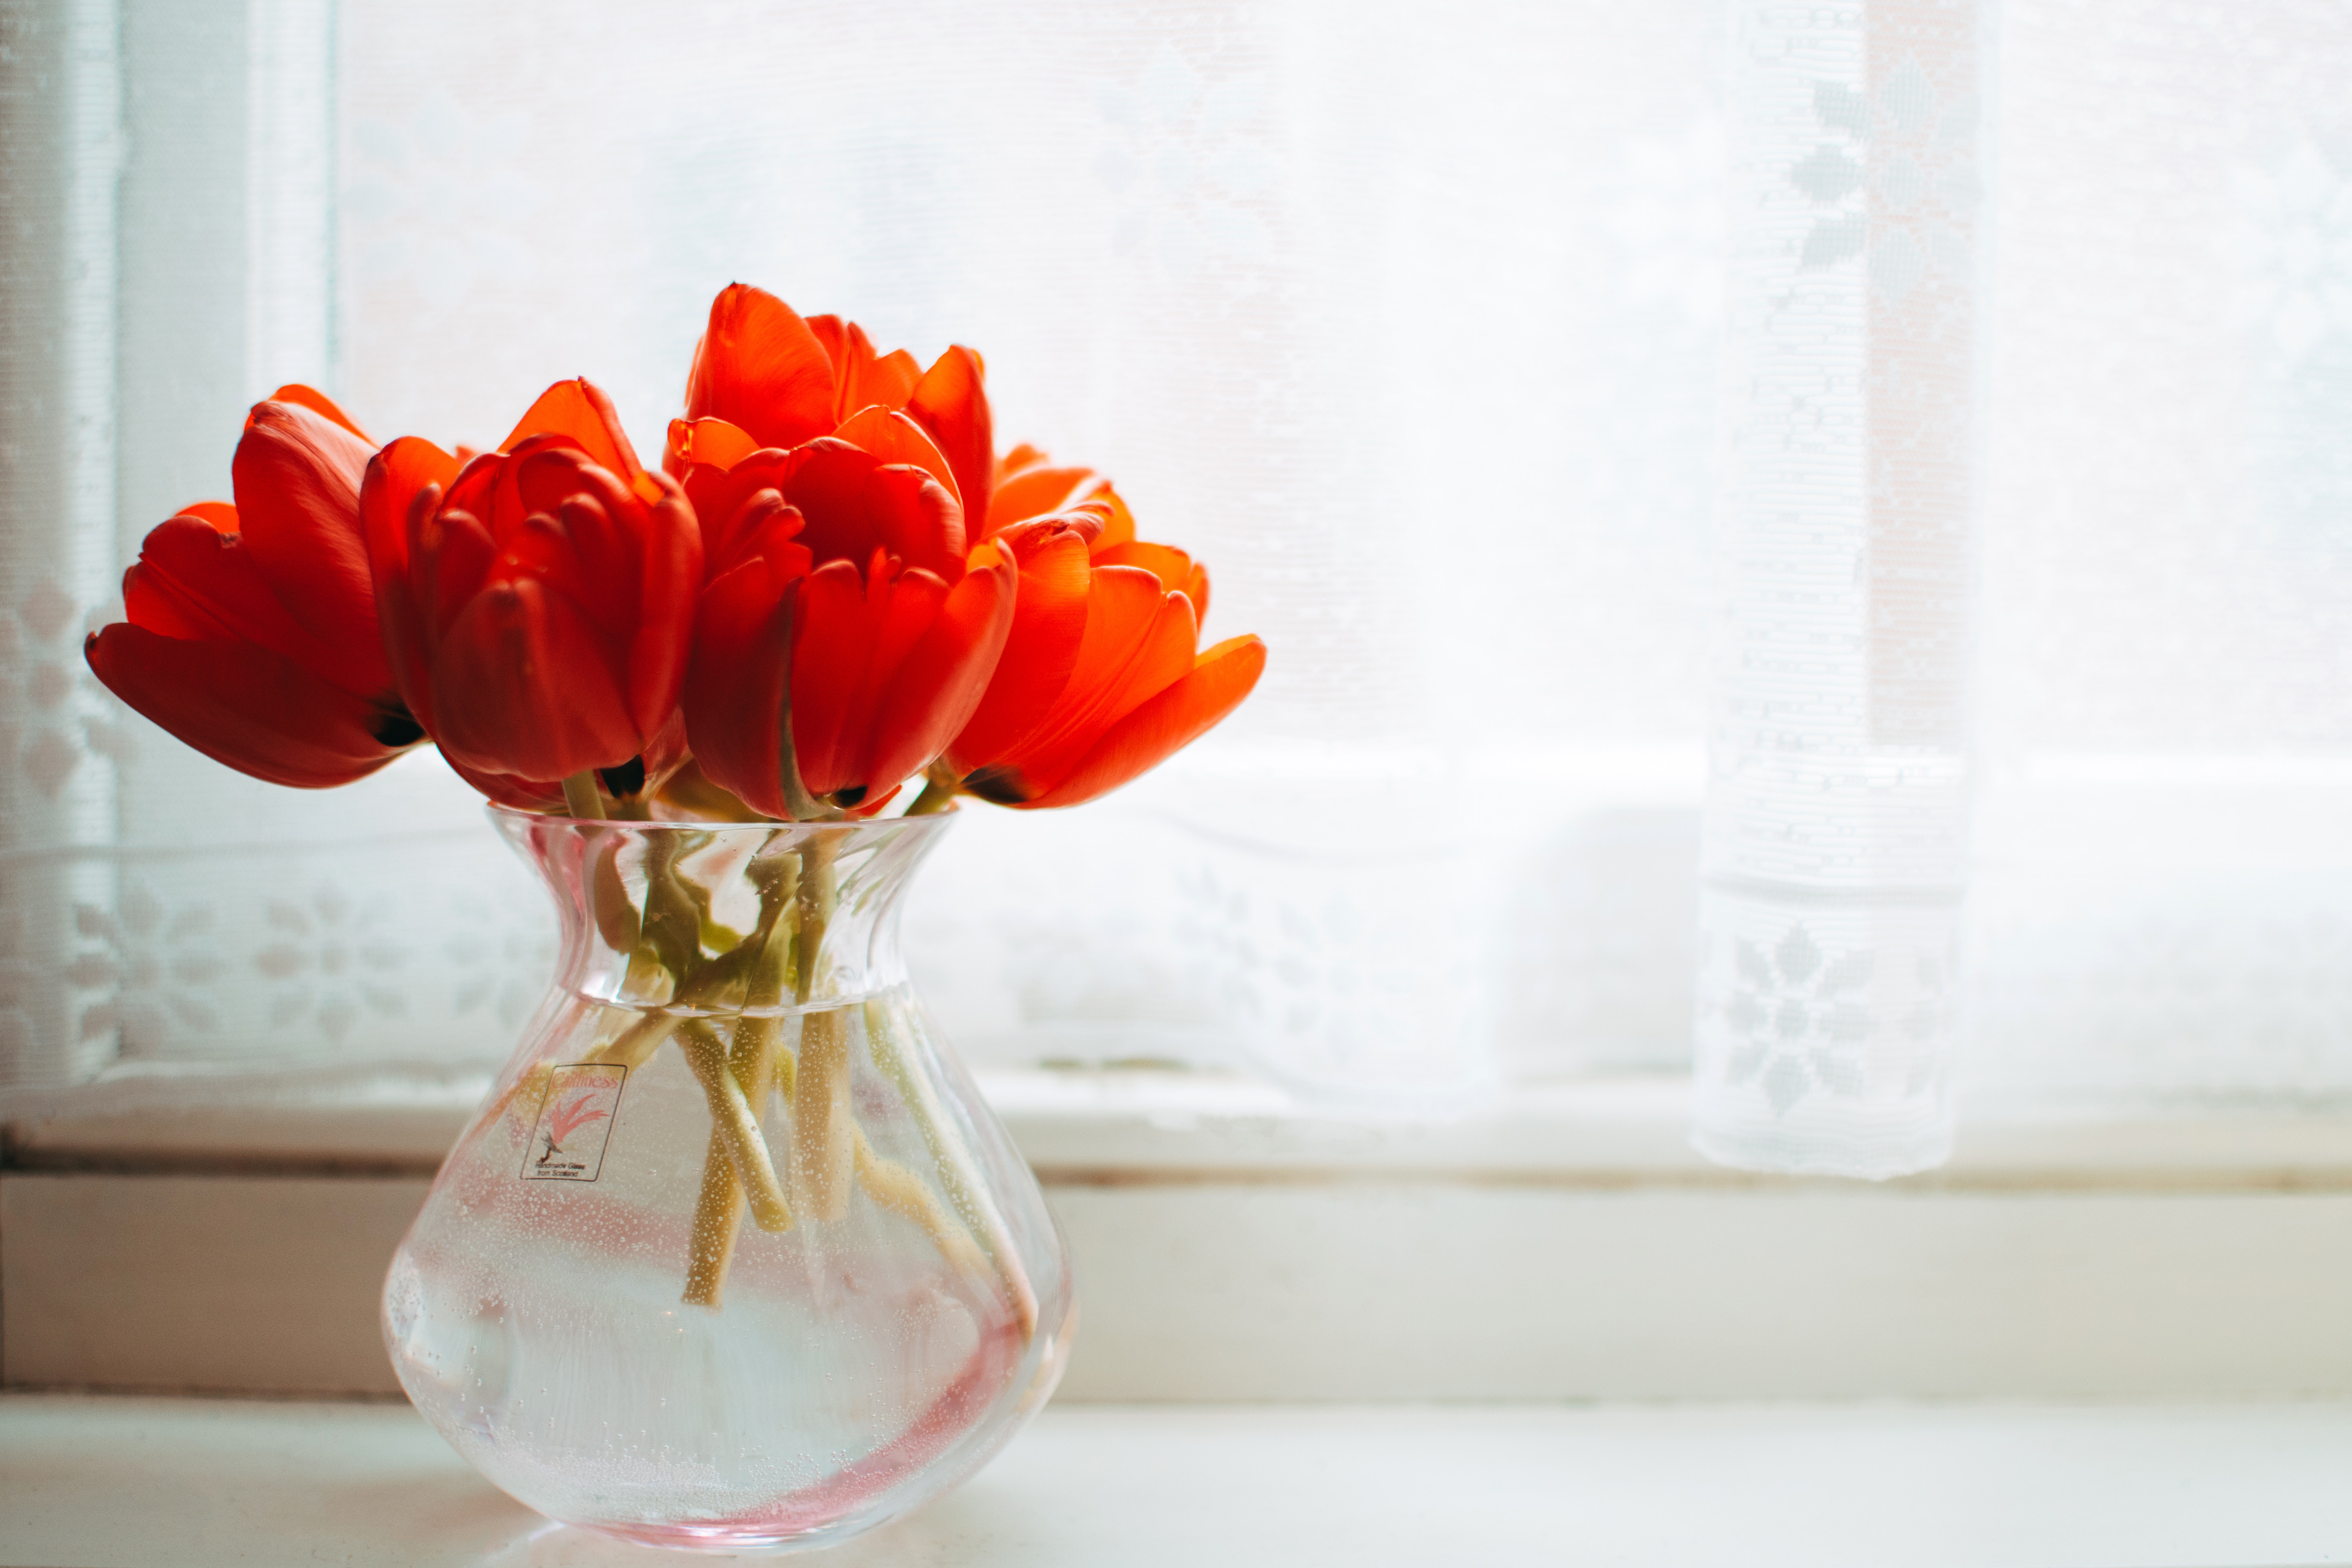 Red Tulips in Clear Glass Vase With Water Centerpiece Near White Curtain, Bouquet, Light, Window, White, HQ Photo